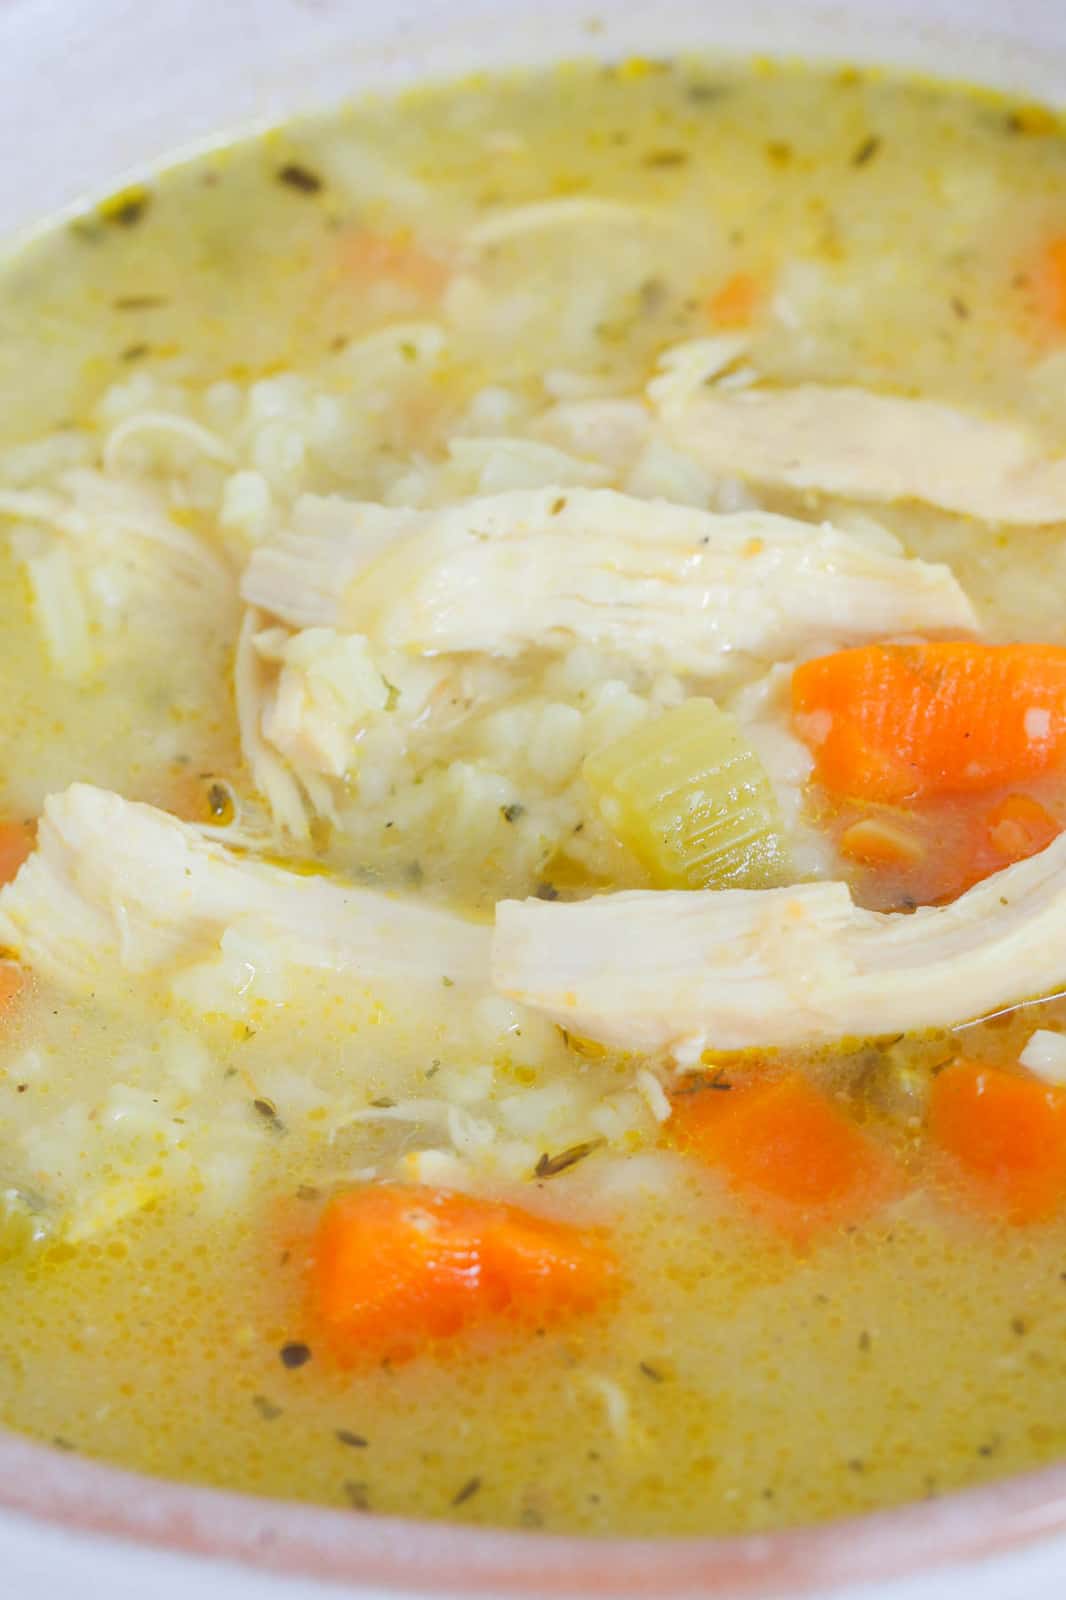 A close up image of soup made with vegetables, shredded chicken and rice in a bowl.